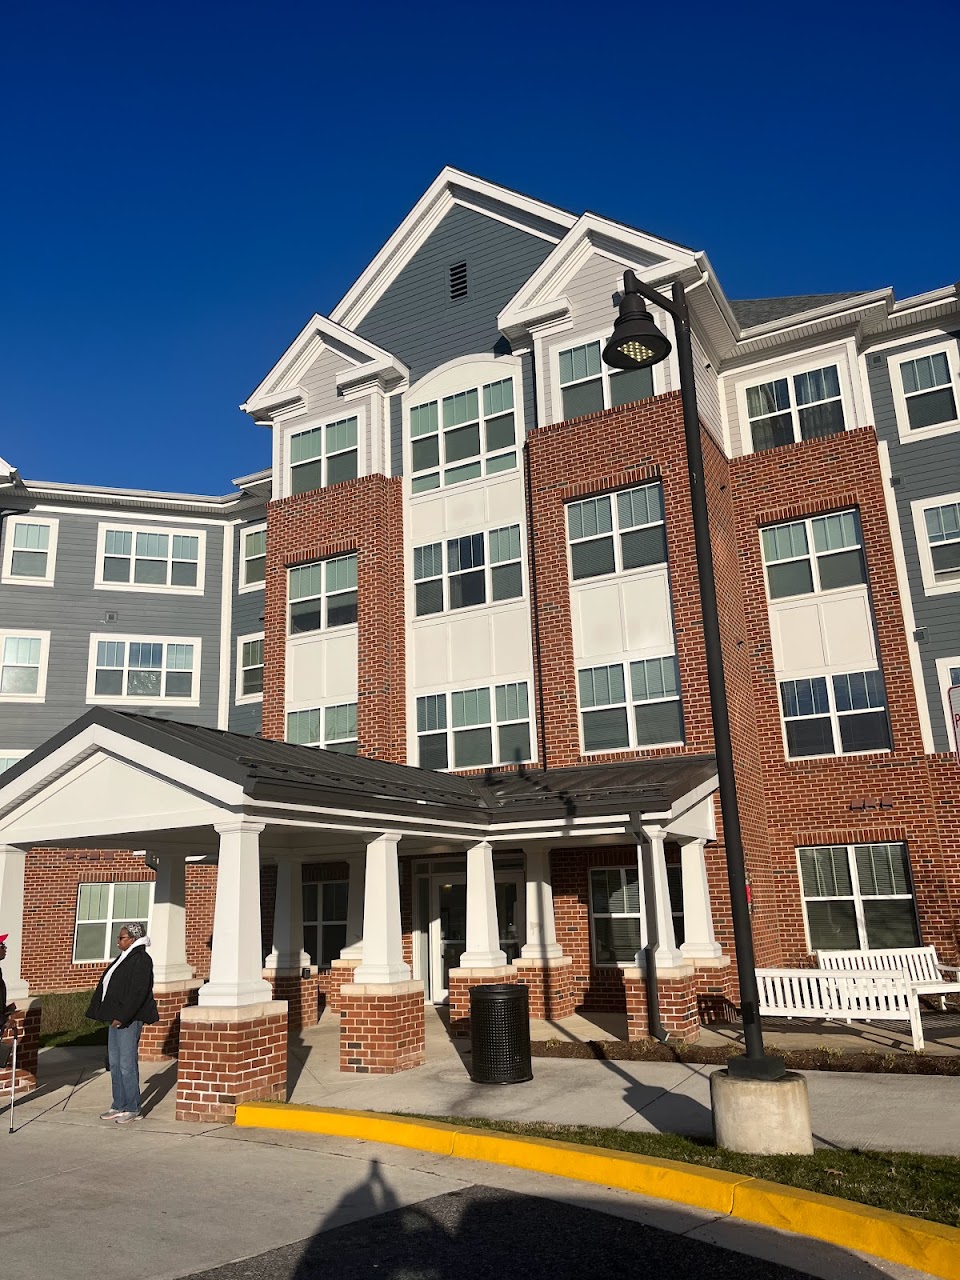 Photo of BELNOR SENIOR RESIDENCES. Affordable housing located at 3800 ST. BARNABAS ROAD SUITLAND, MD 20746